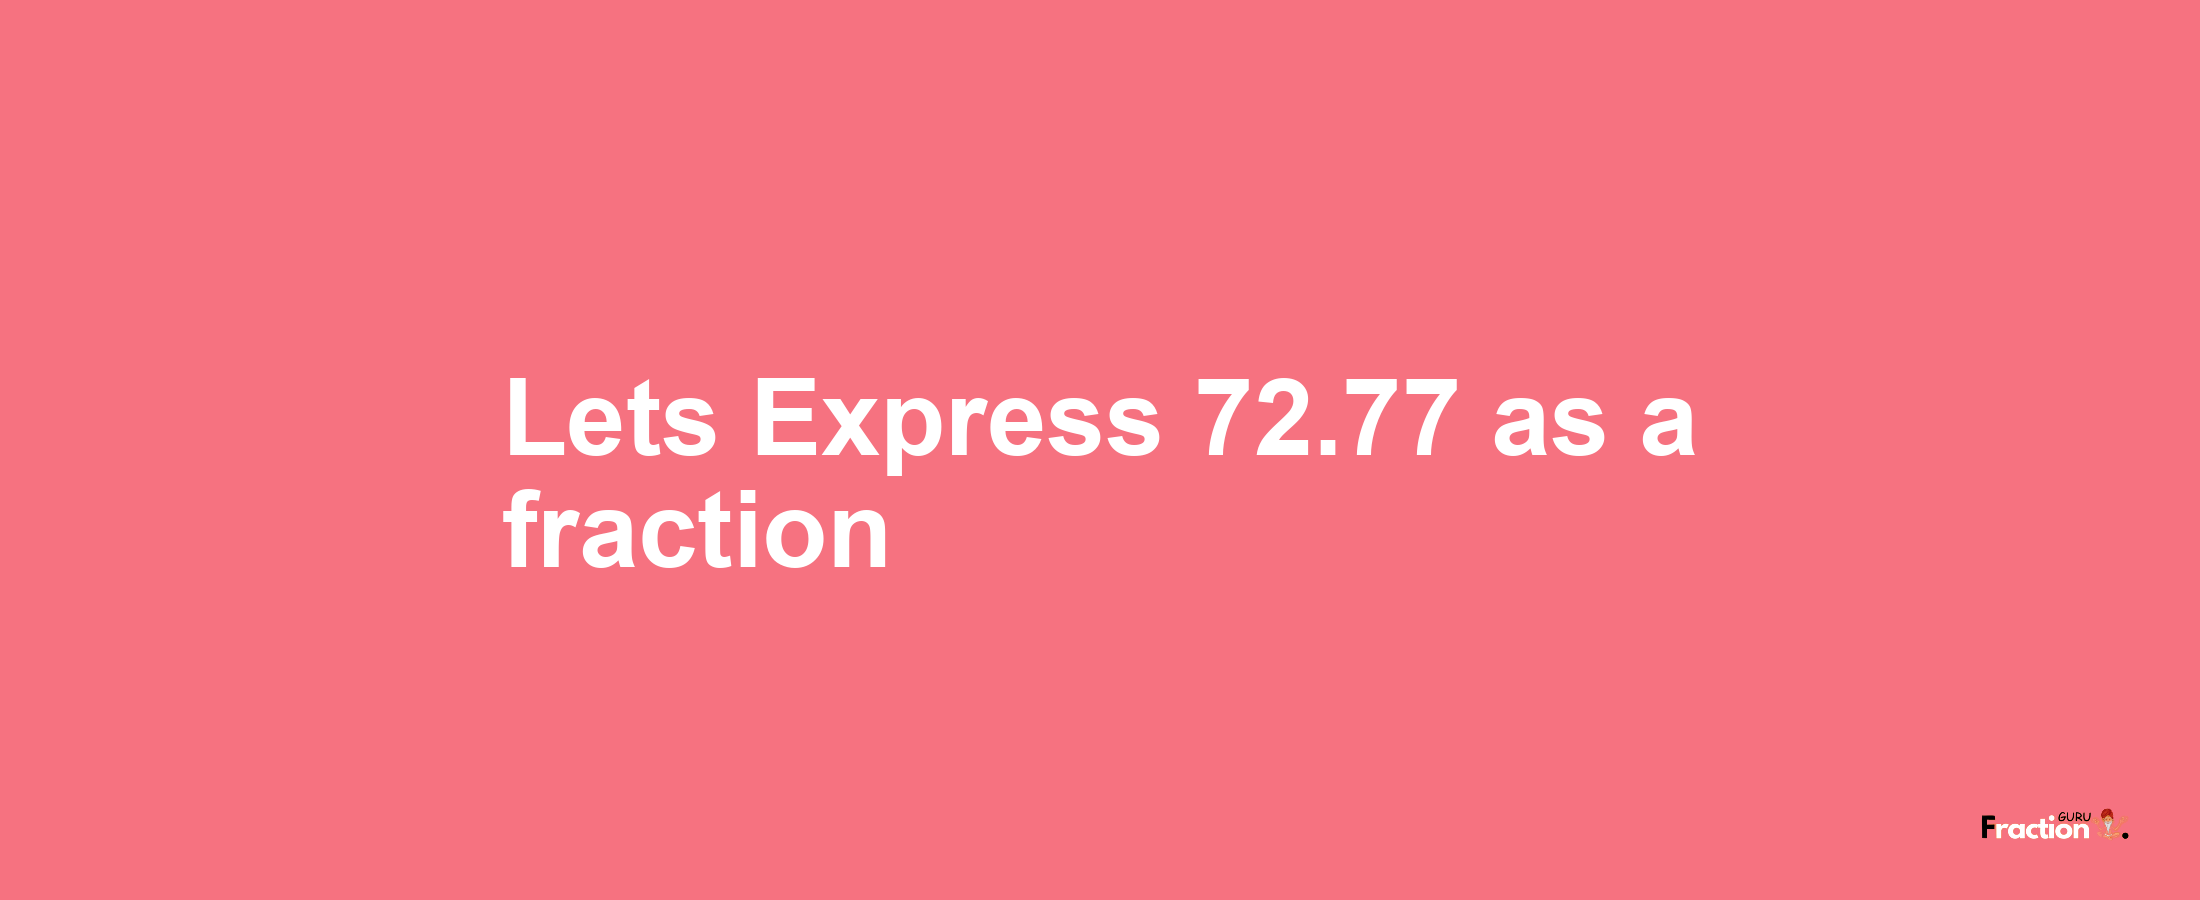 Lets Express 72.77 as afraction